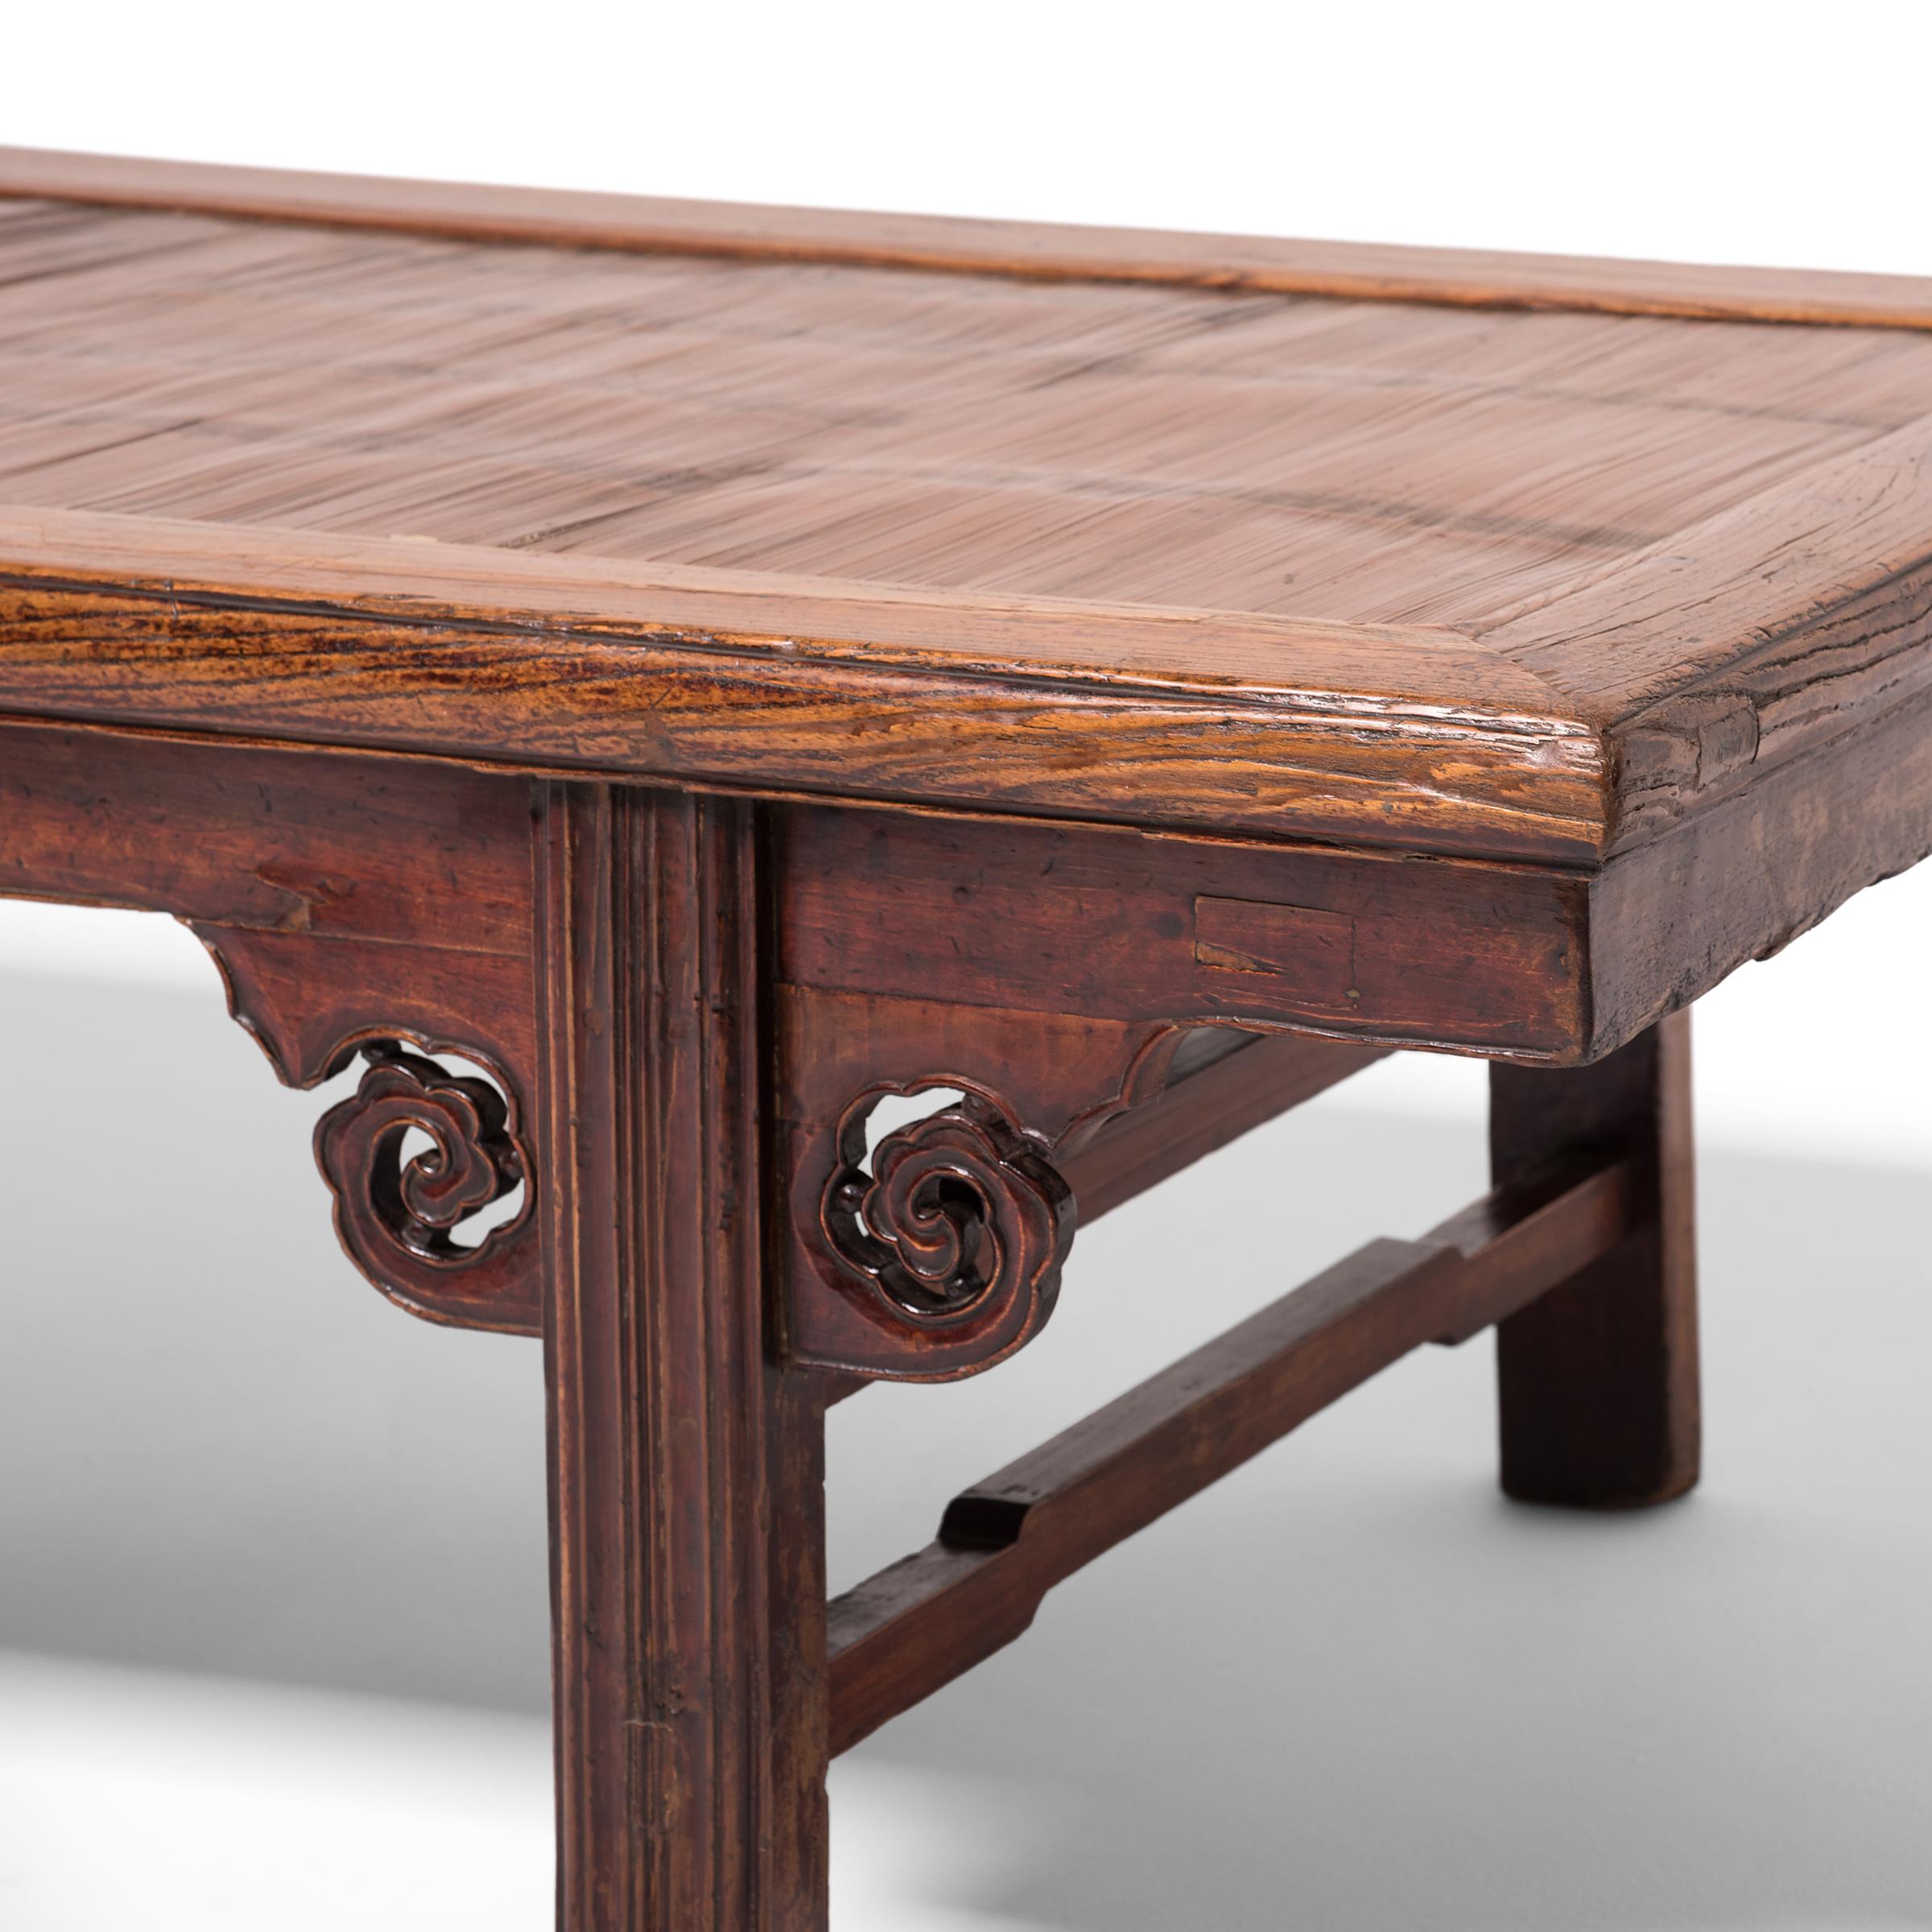 Low Chinese Kang Table with Spiral Spandrels, c. 1850 In Good Condition For Sale In Chicago, IL